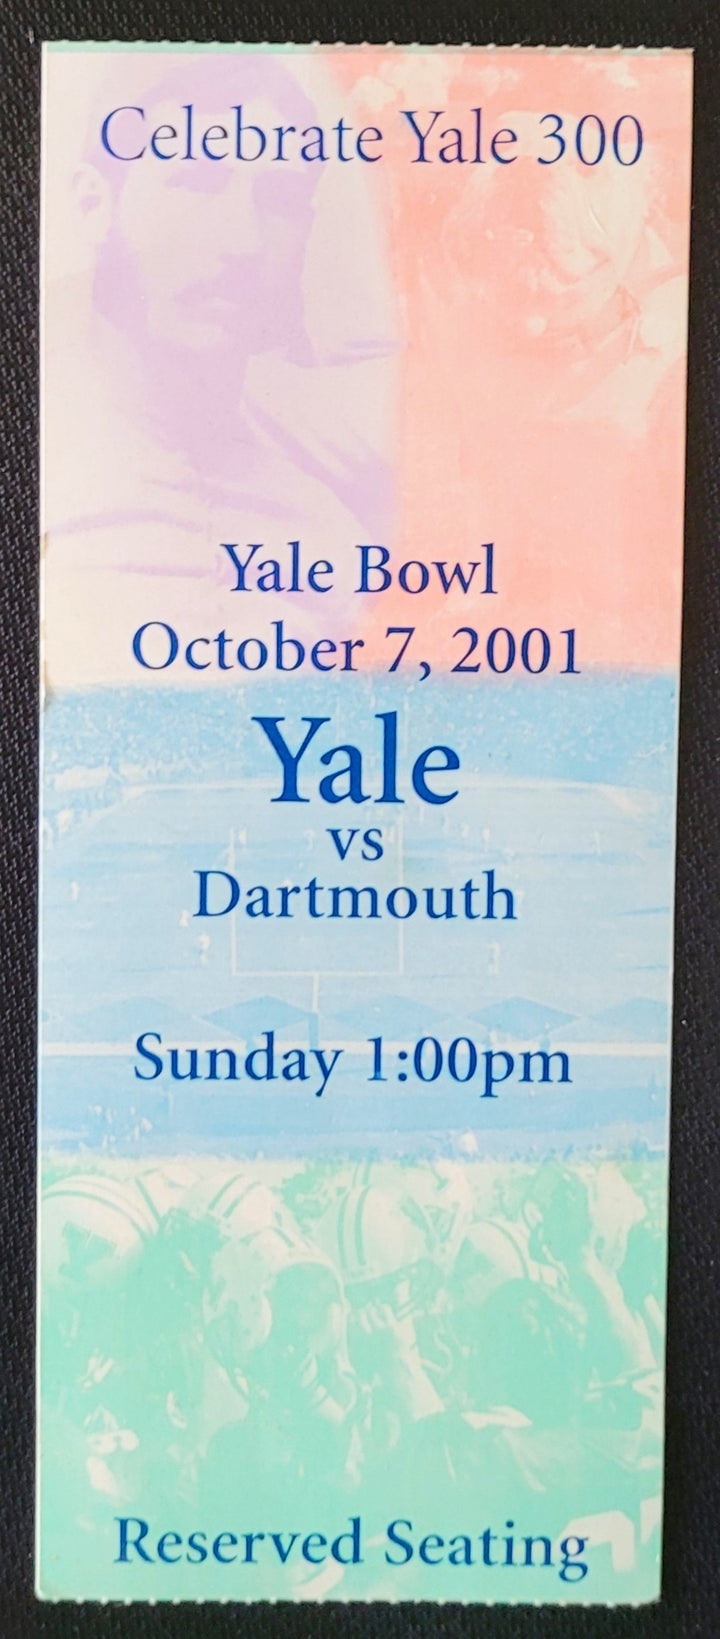 2001 Celebrate Yale 300 Yale vs Dartmouth Football Reserved Seat Ticket Stub Oct 7, 2001 Yale Bowl New Haven, Ct.